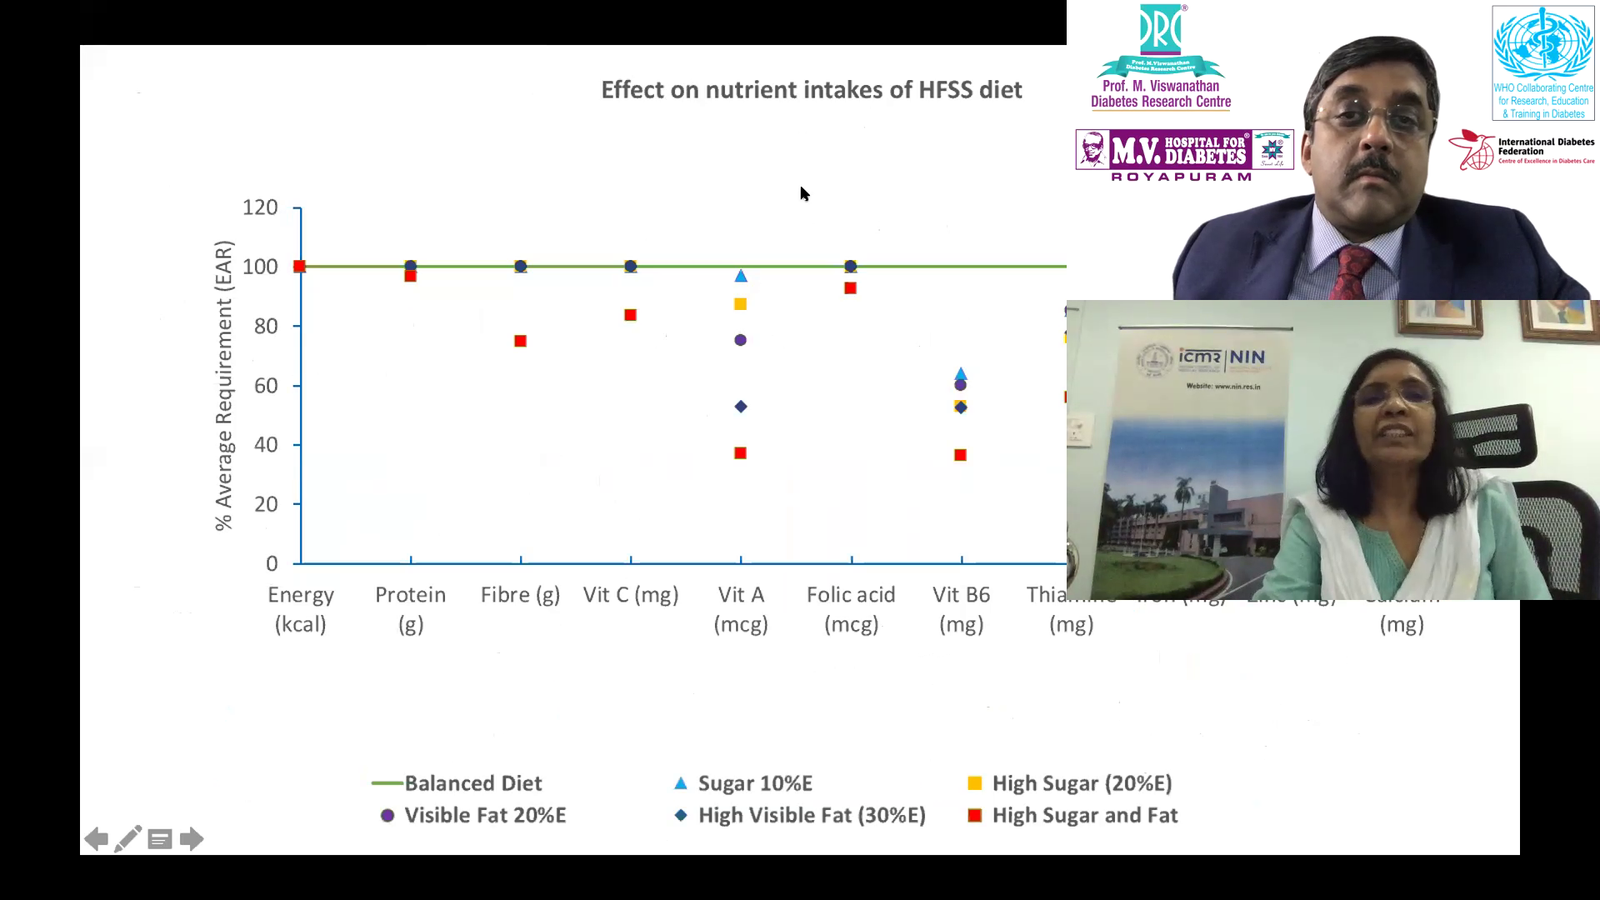 Effect On Nutrient Intakes Of HFSS Diet